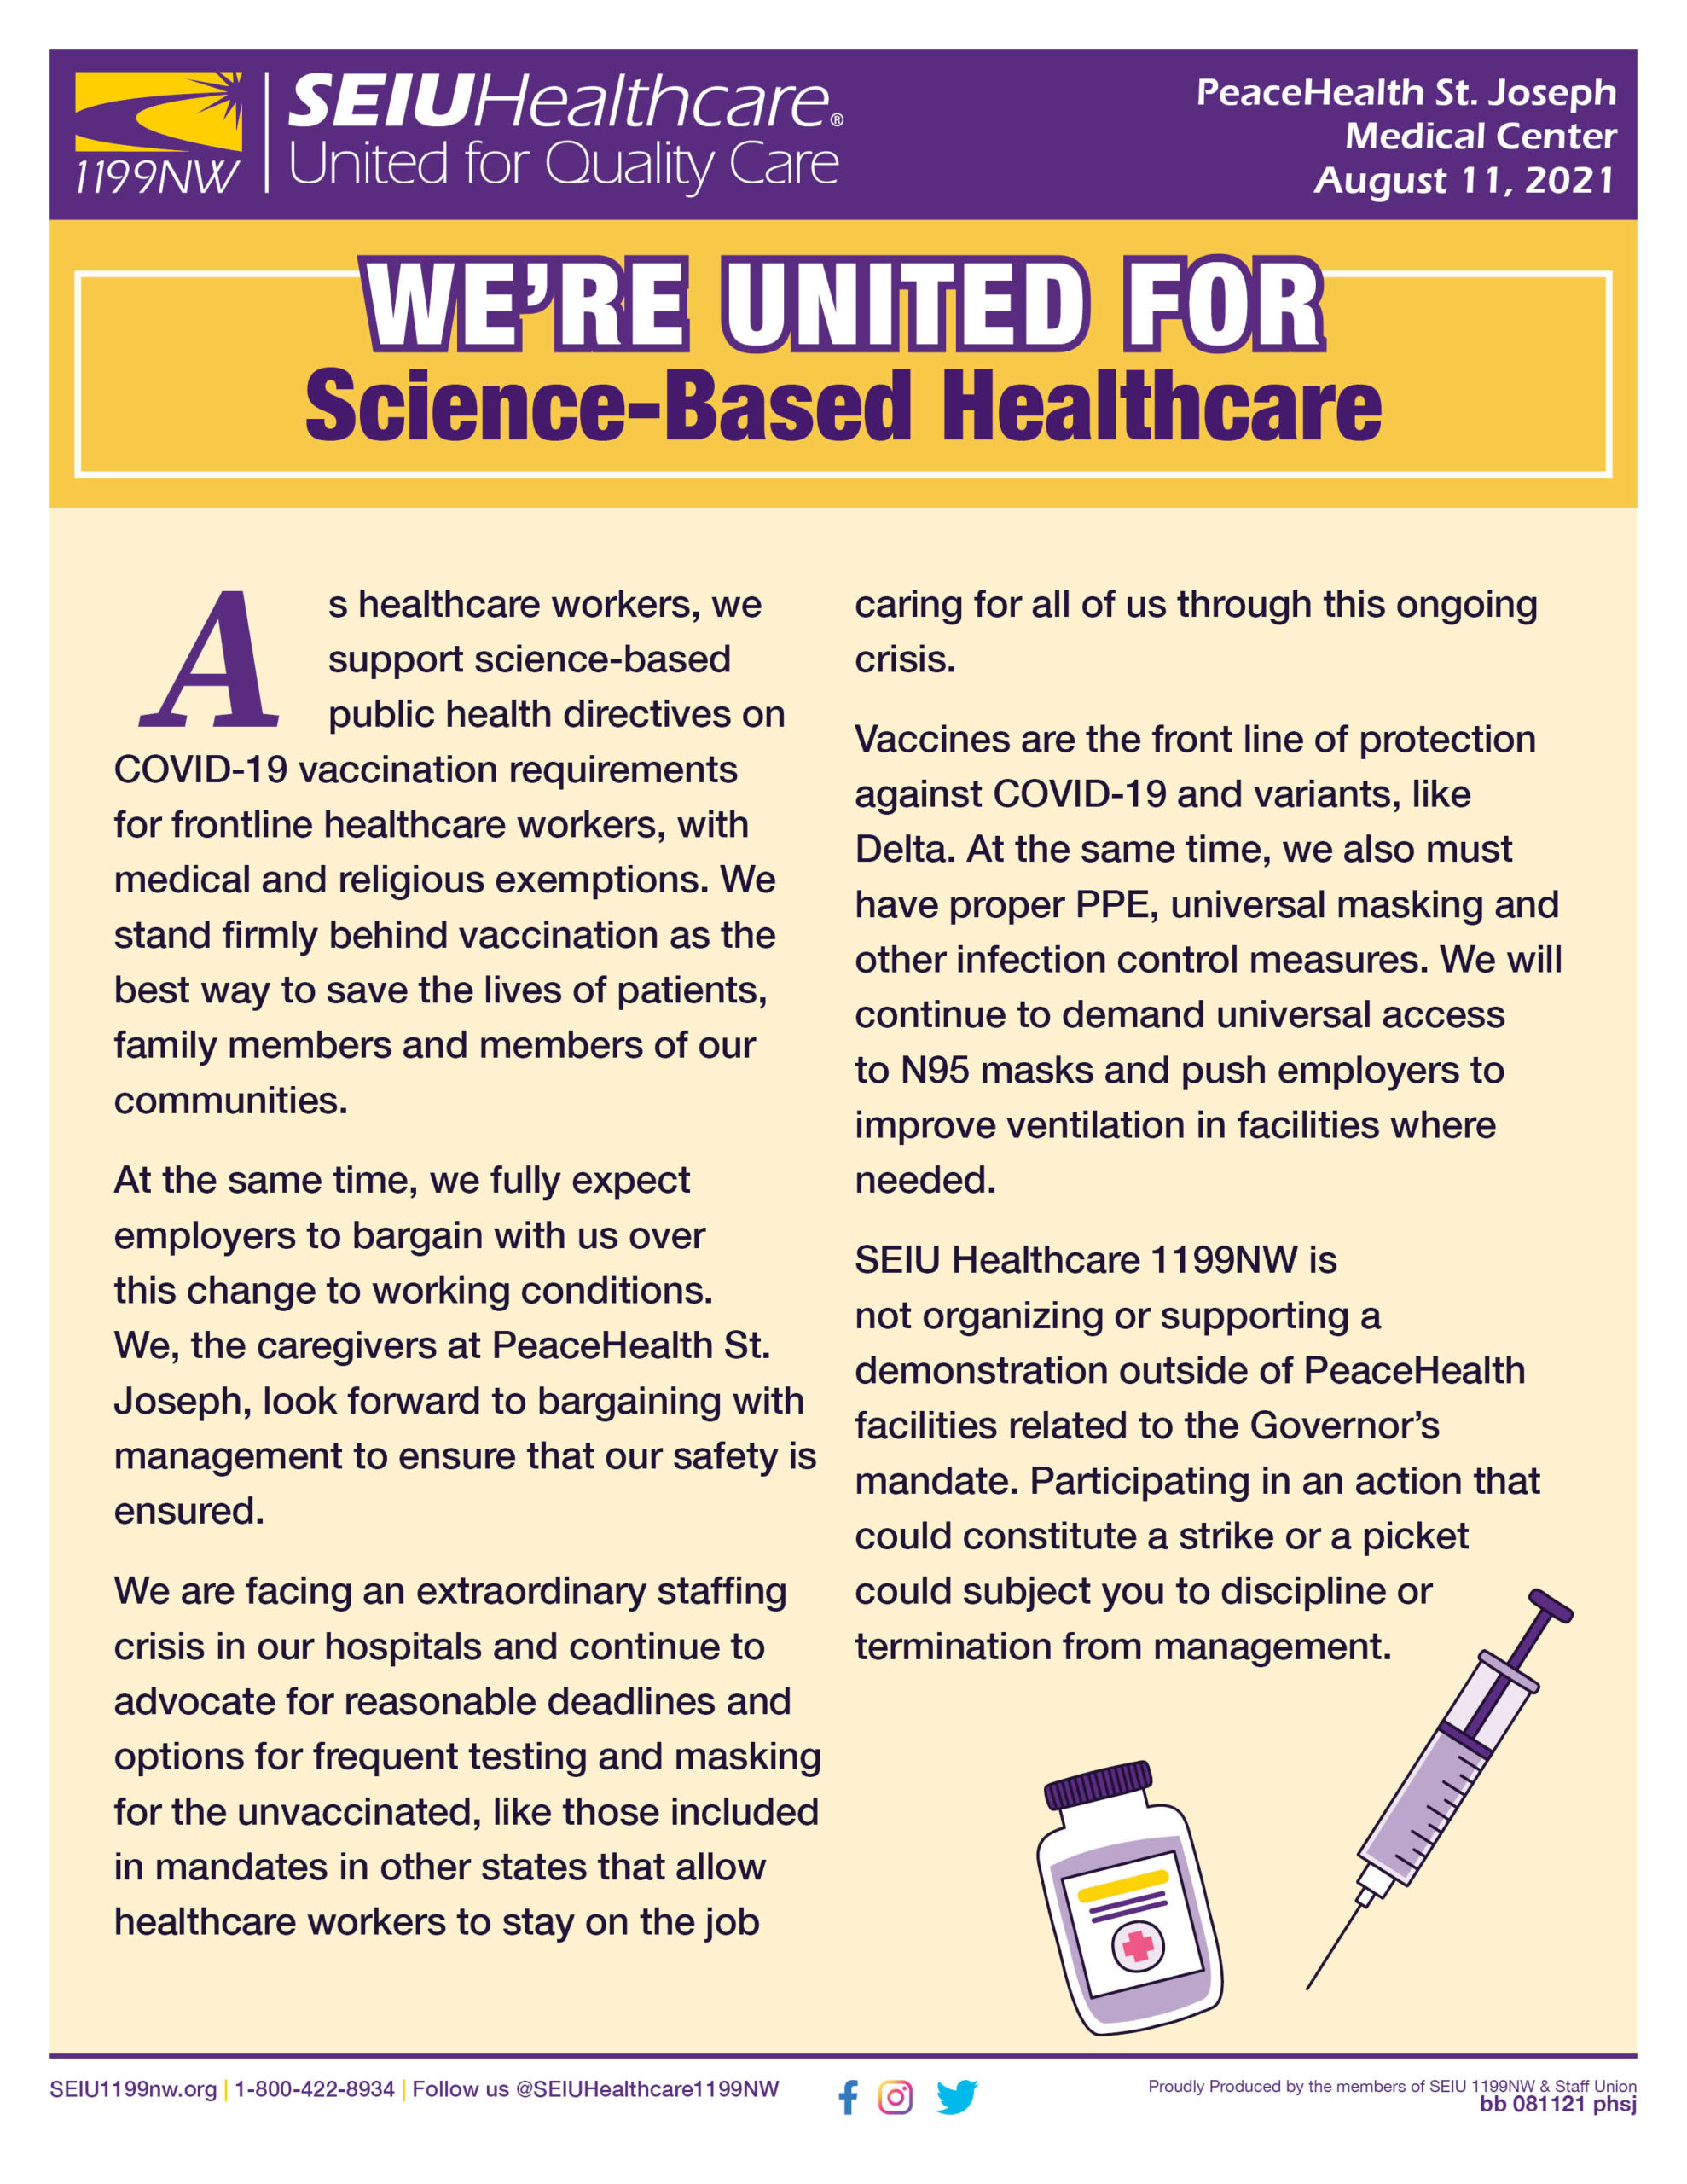 We're United for Science-Based Healthcare